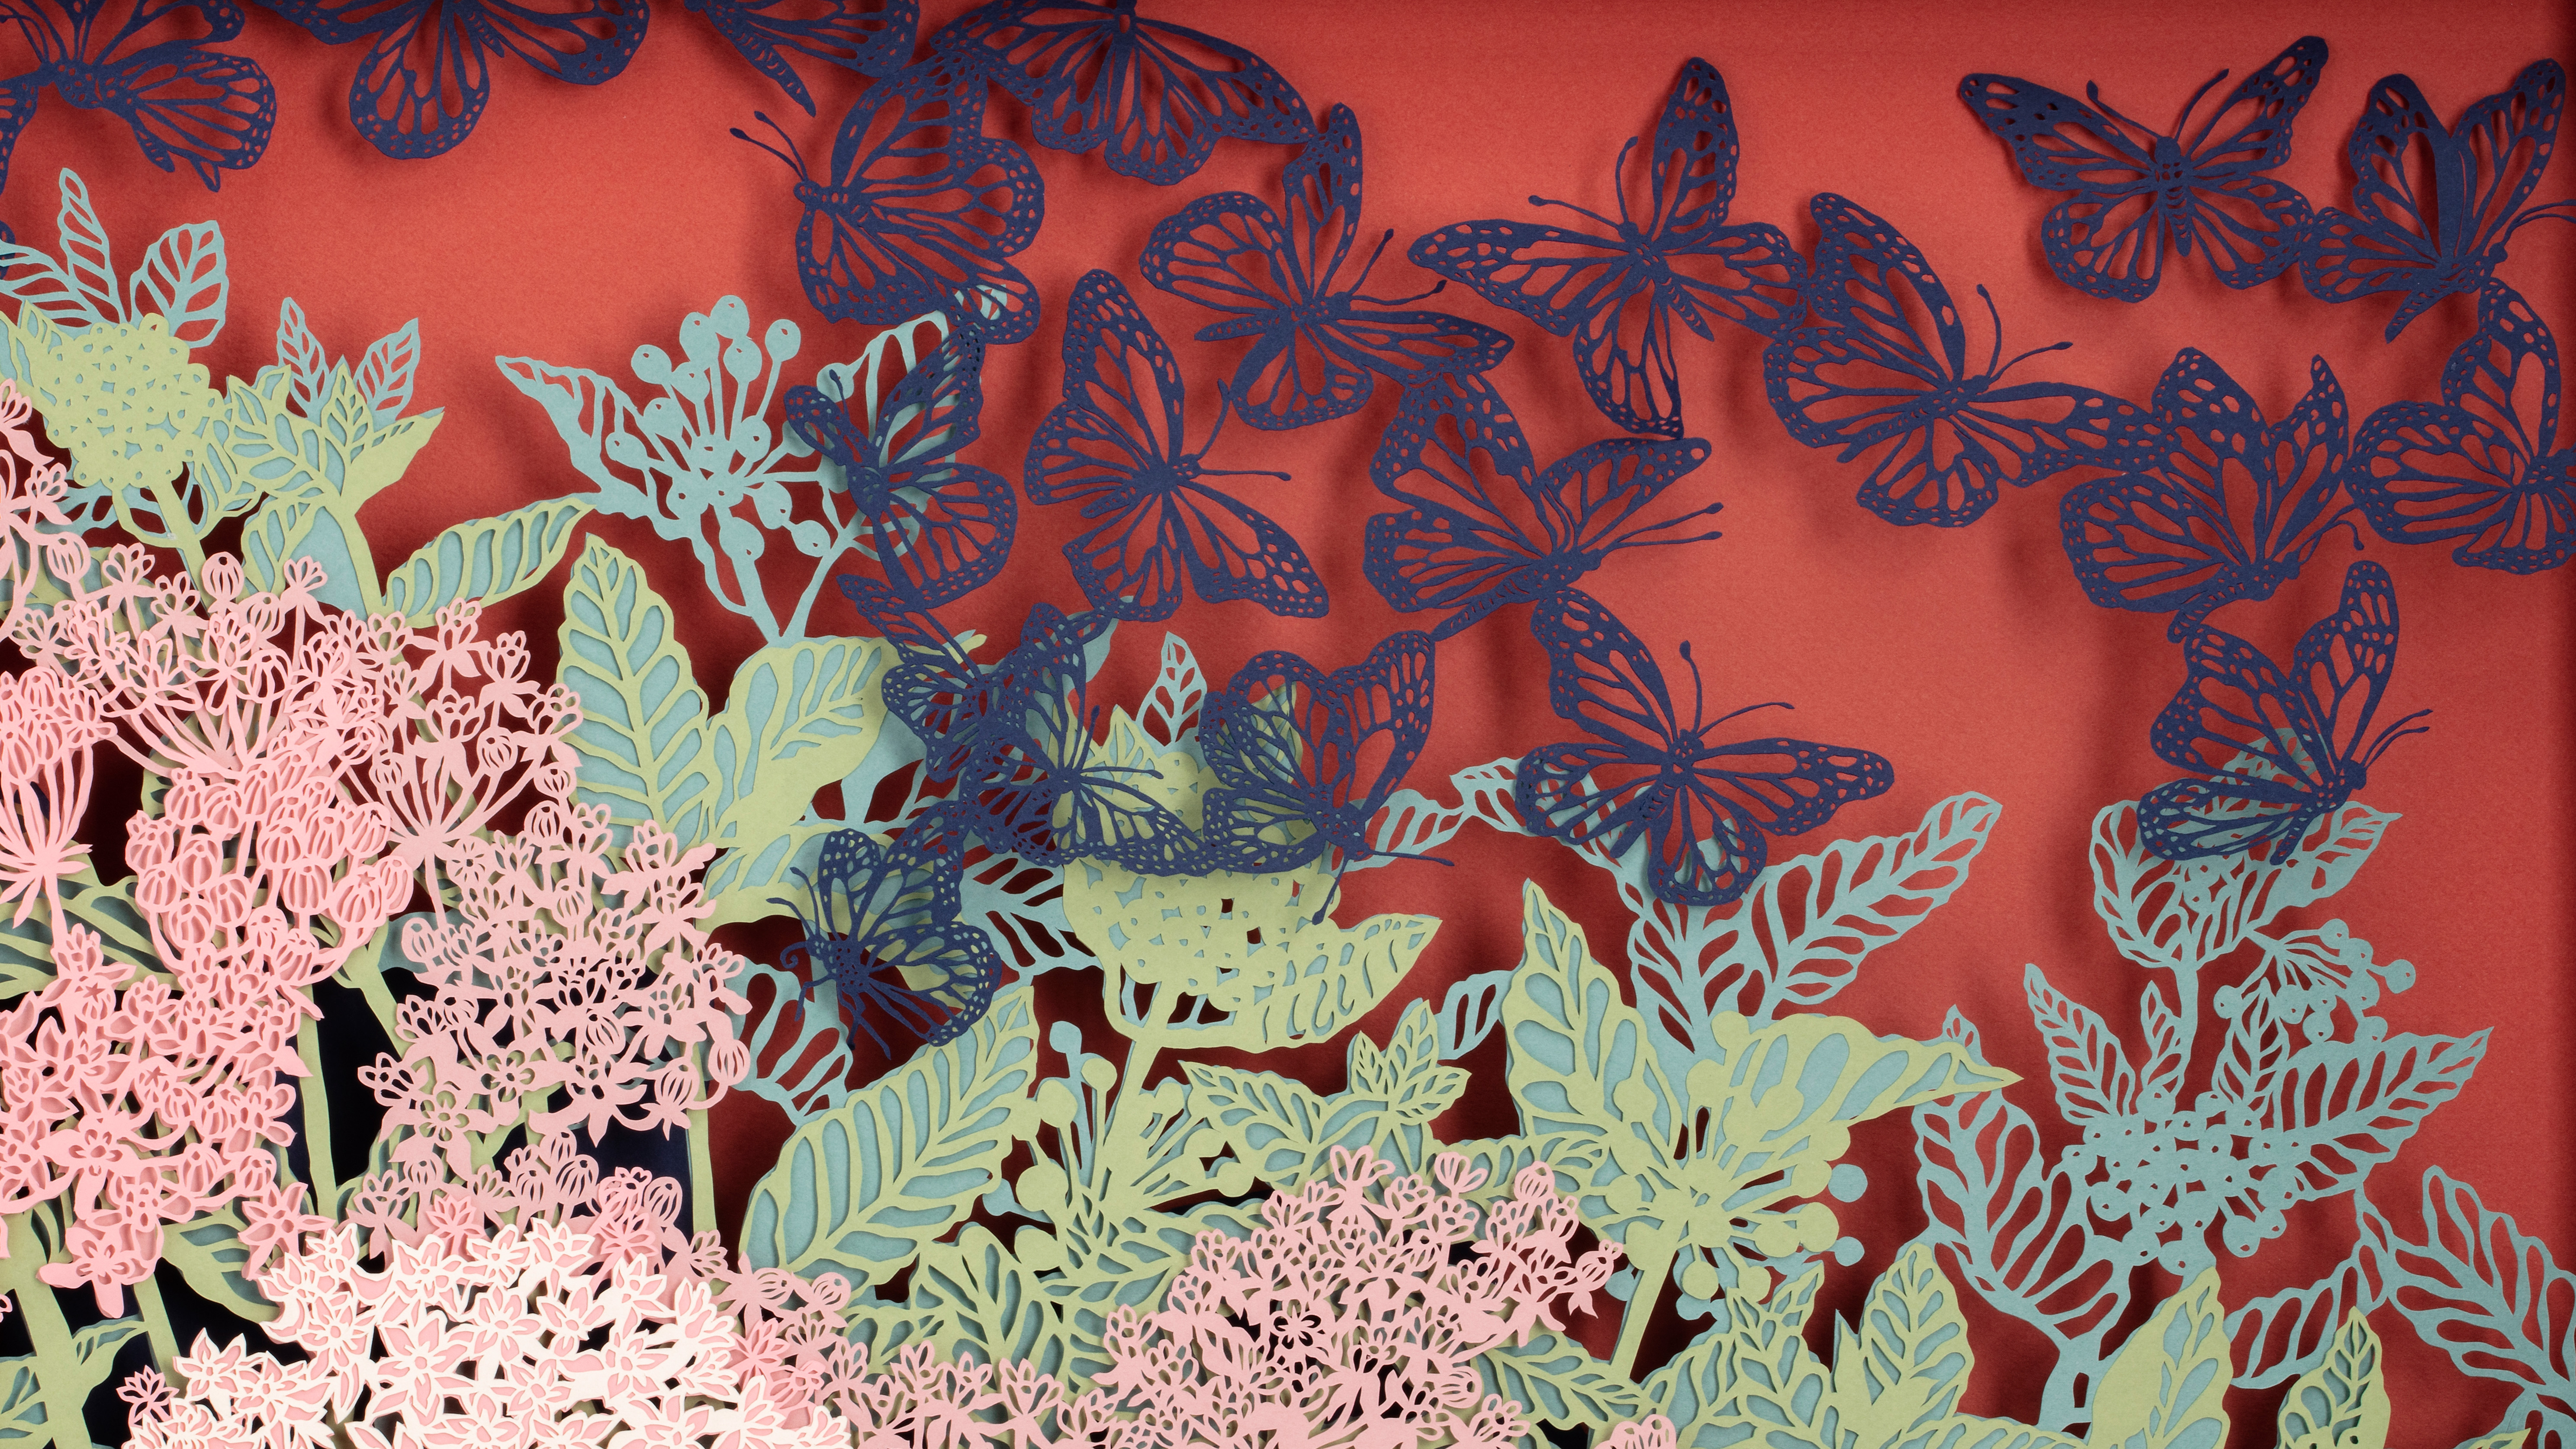 Navy blue cut paper butterflies swarm across a red background with foamy pink cut paper flowers with green leaves